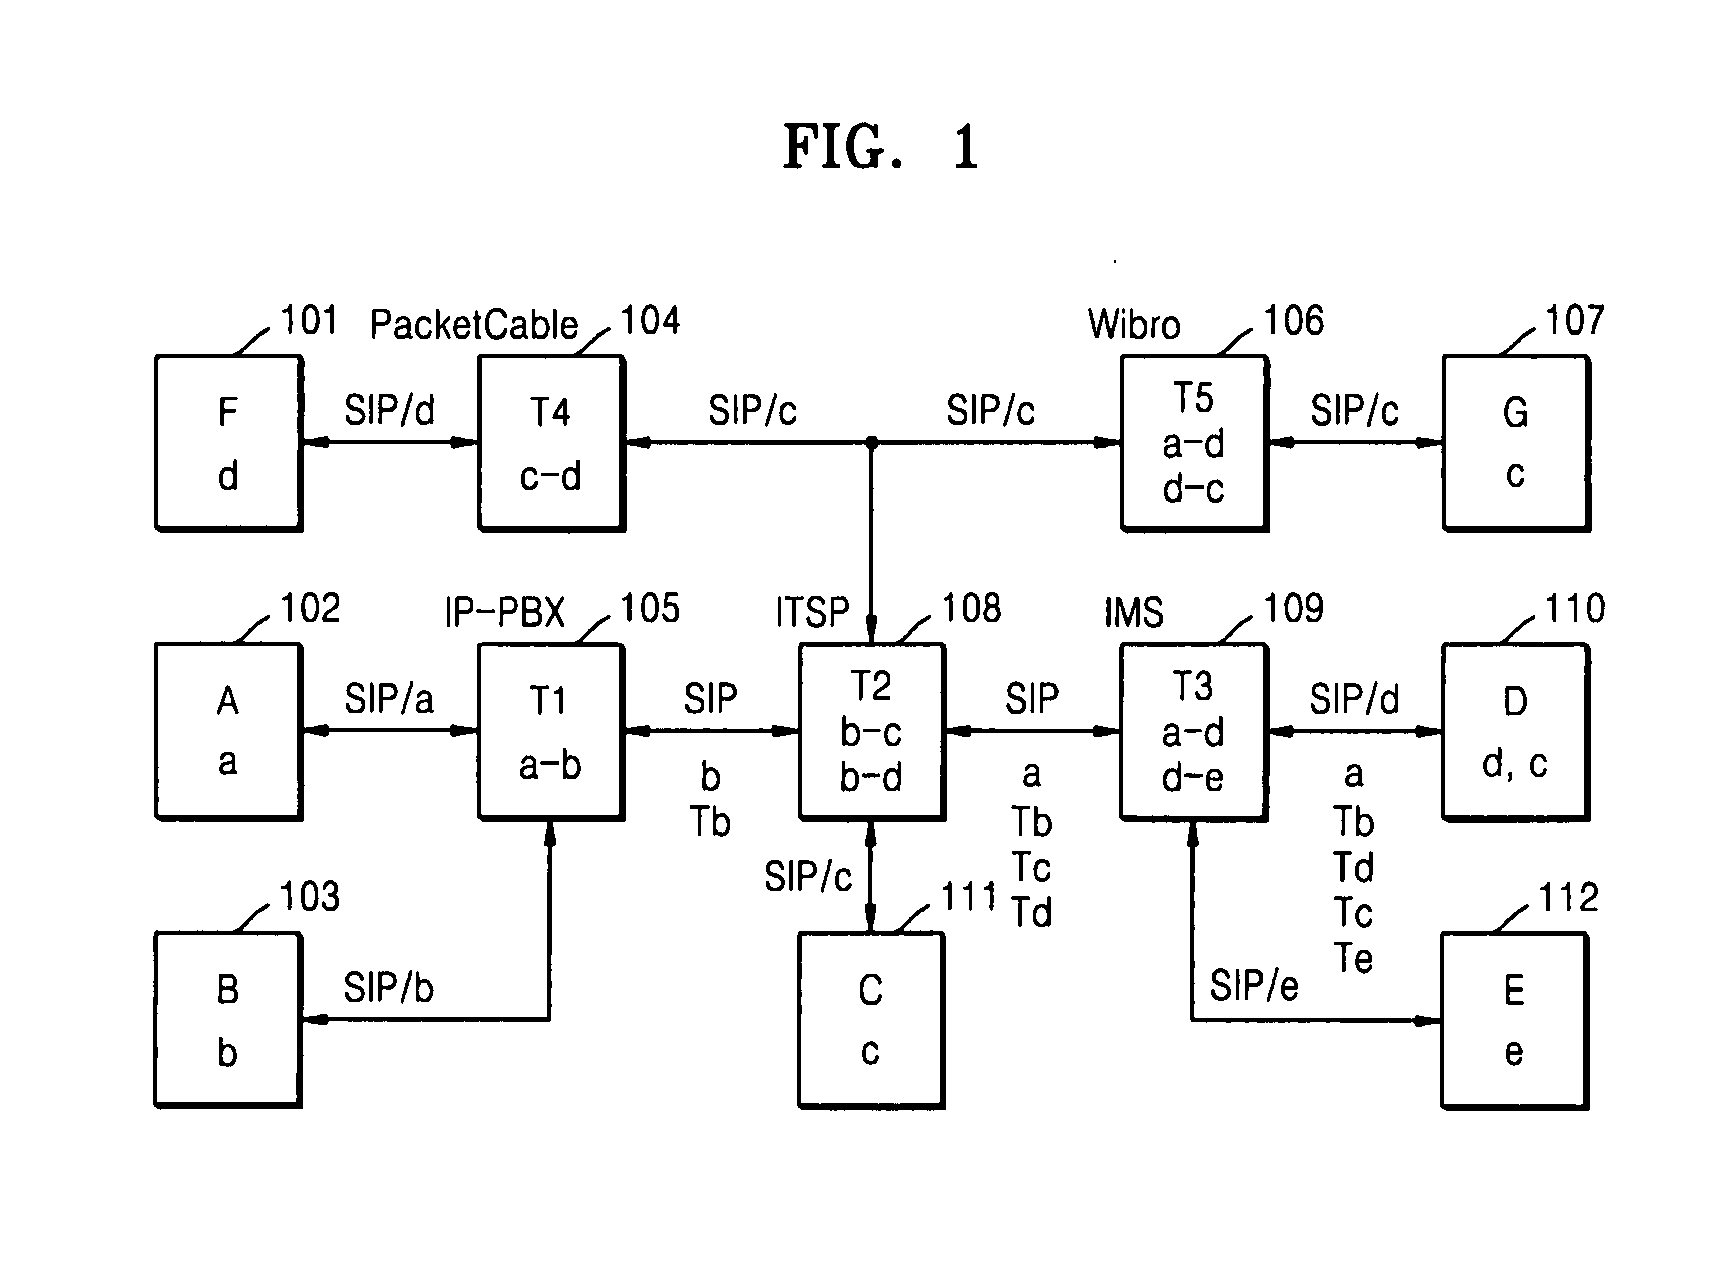 Apparatus and method for minimizing number of transcodings in multi-network multi-codec environment